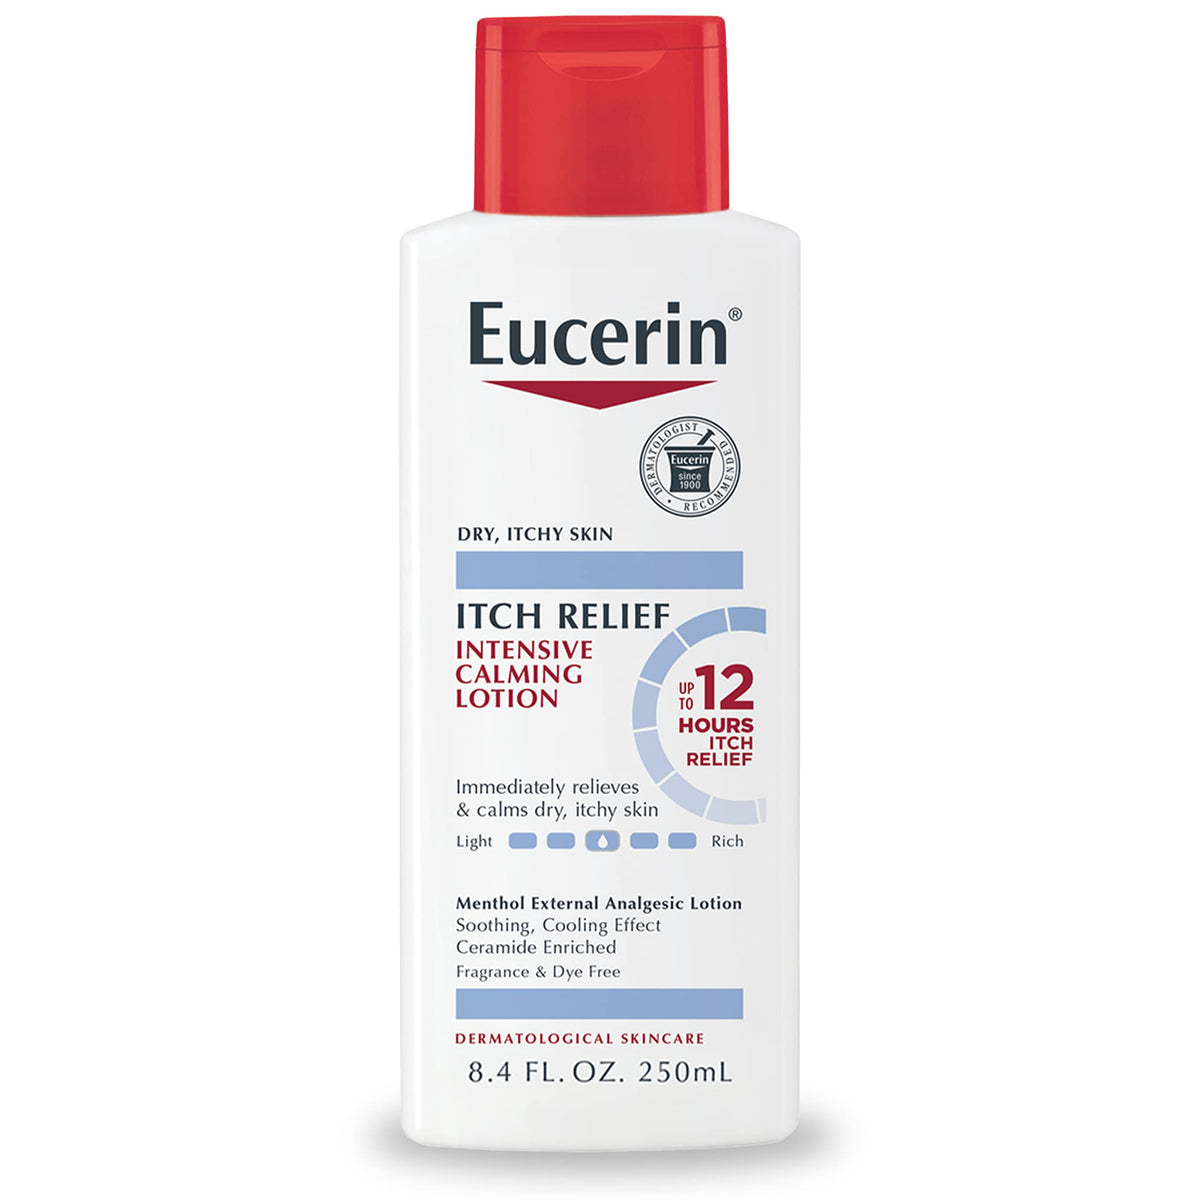 Eucerin Itch Relief Intensive Calming Lotion 8.4 oz